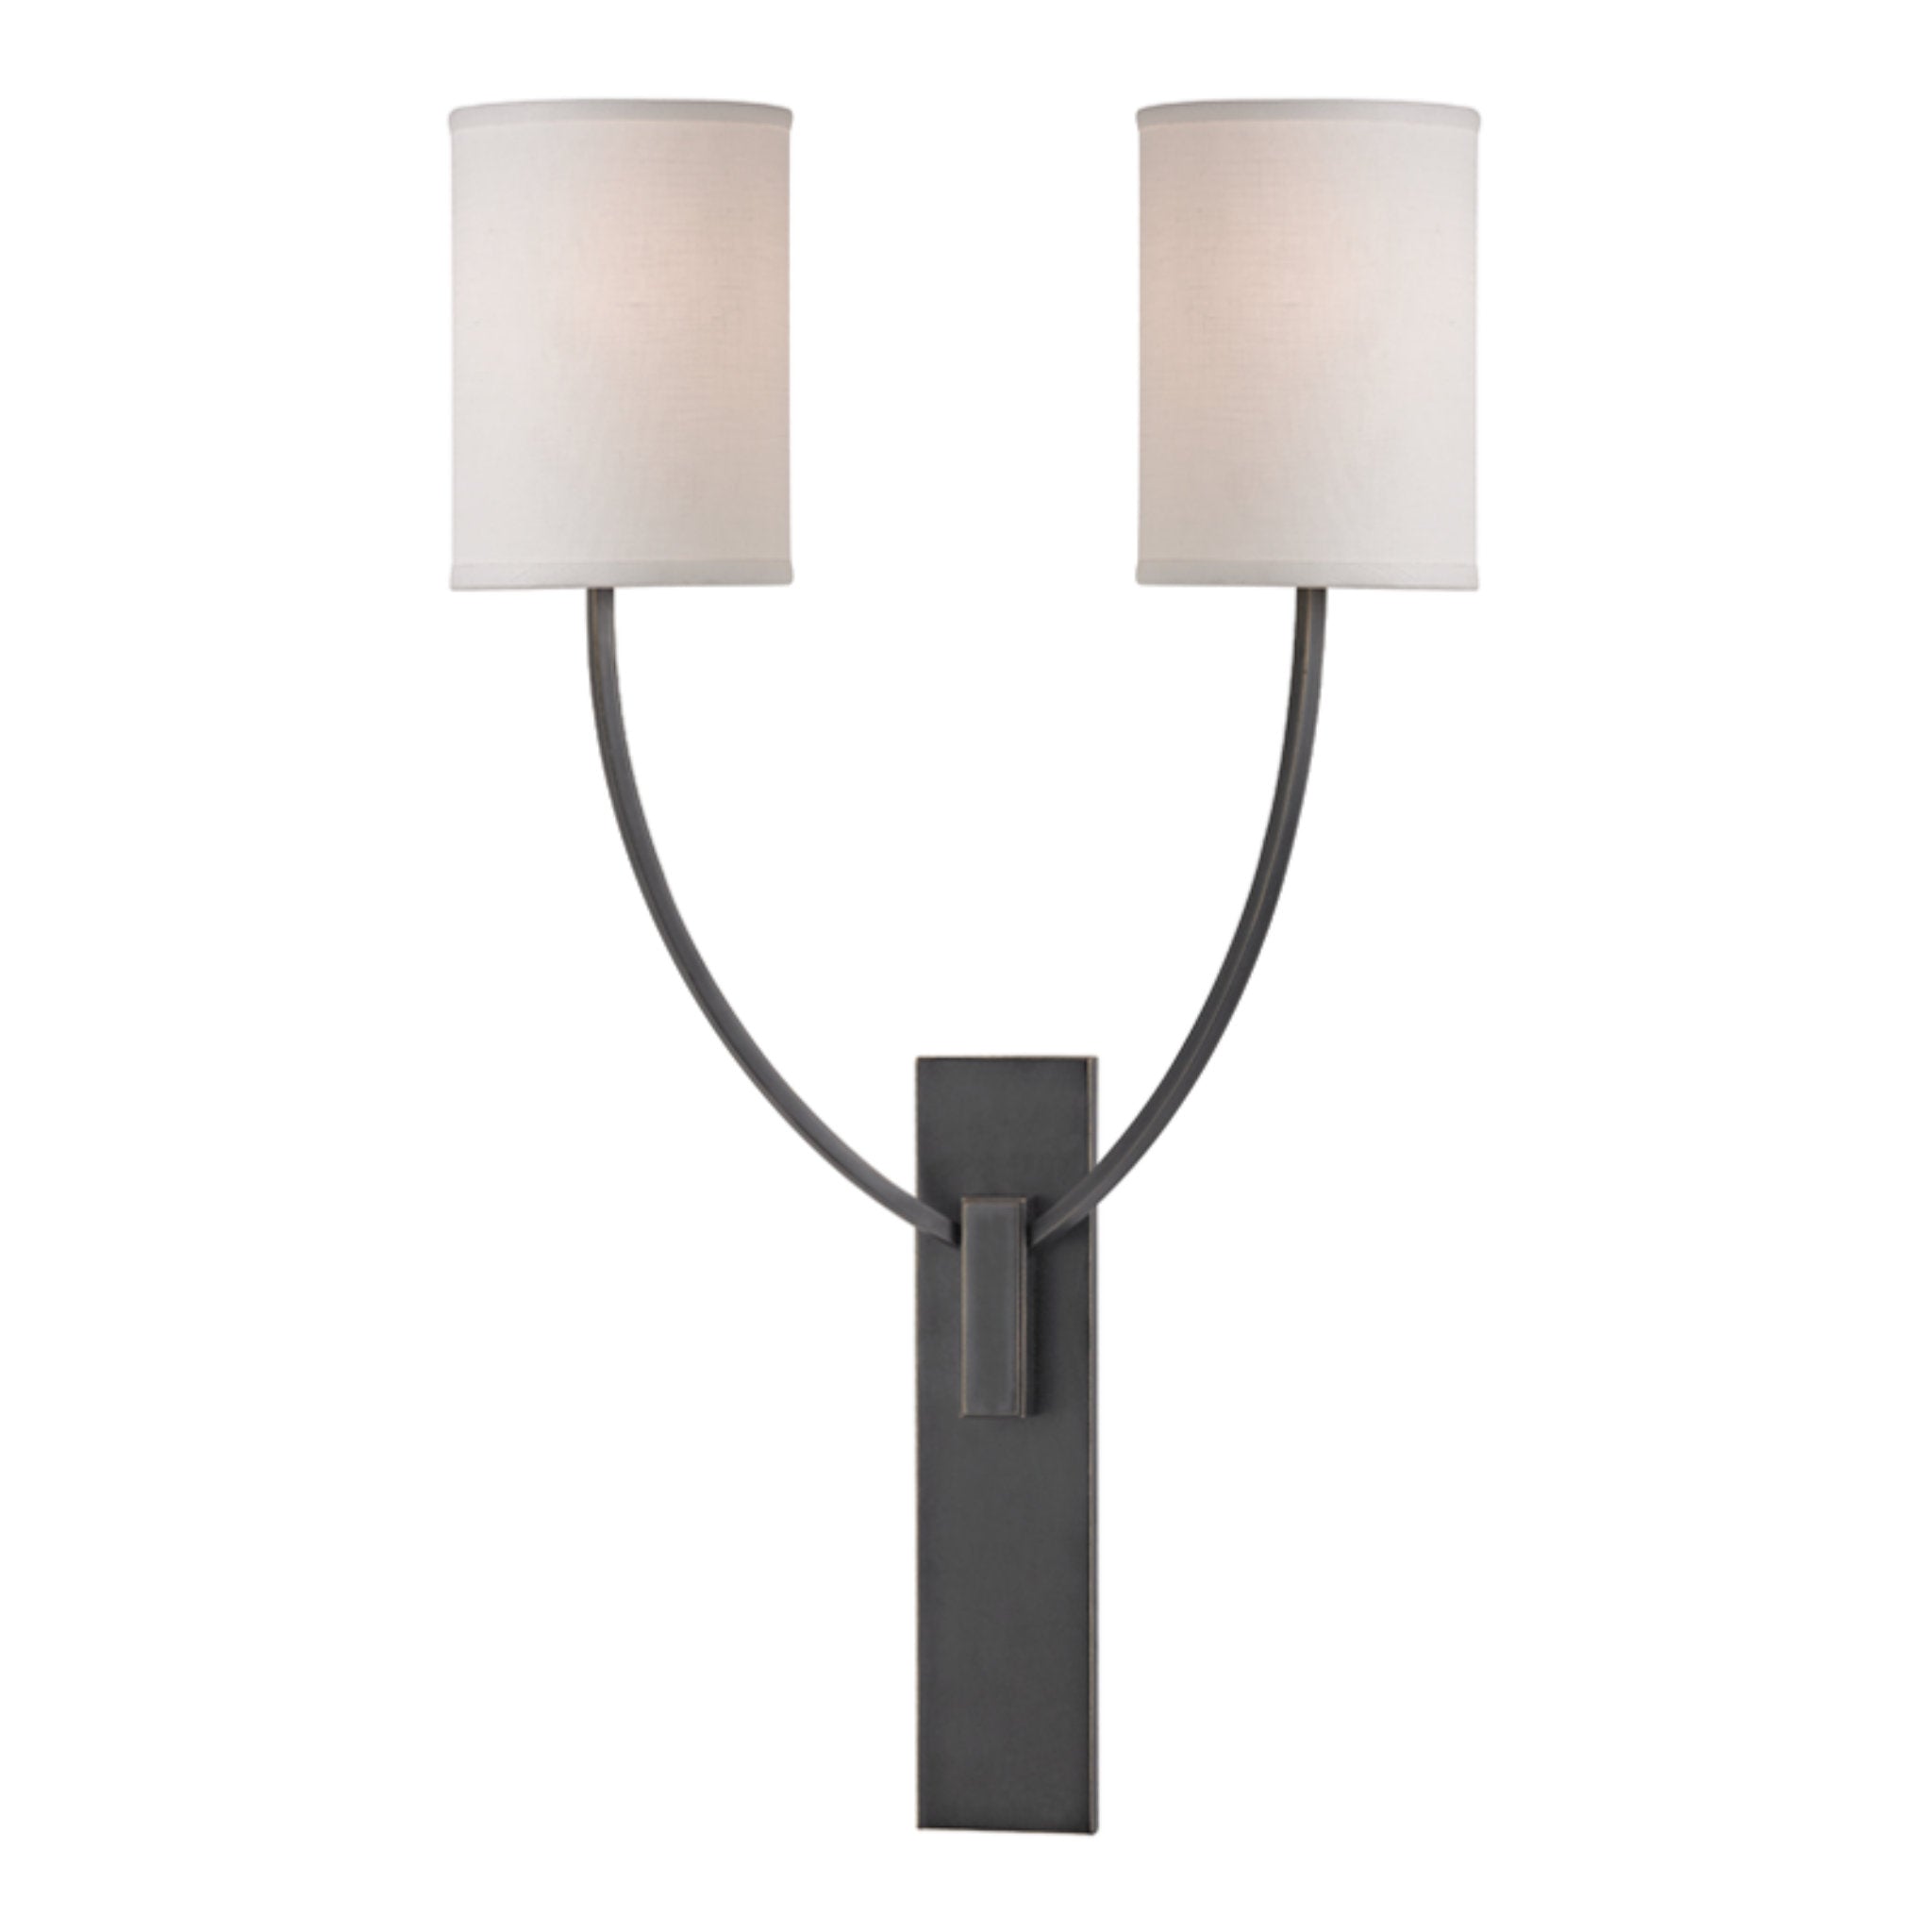 Colton 2 Light Wall Sconce in Old Bronze